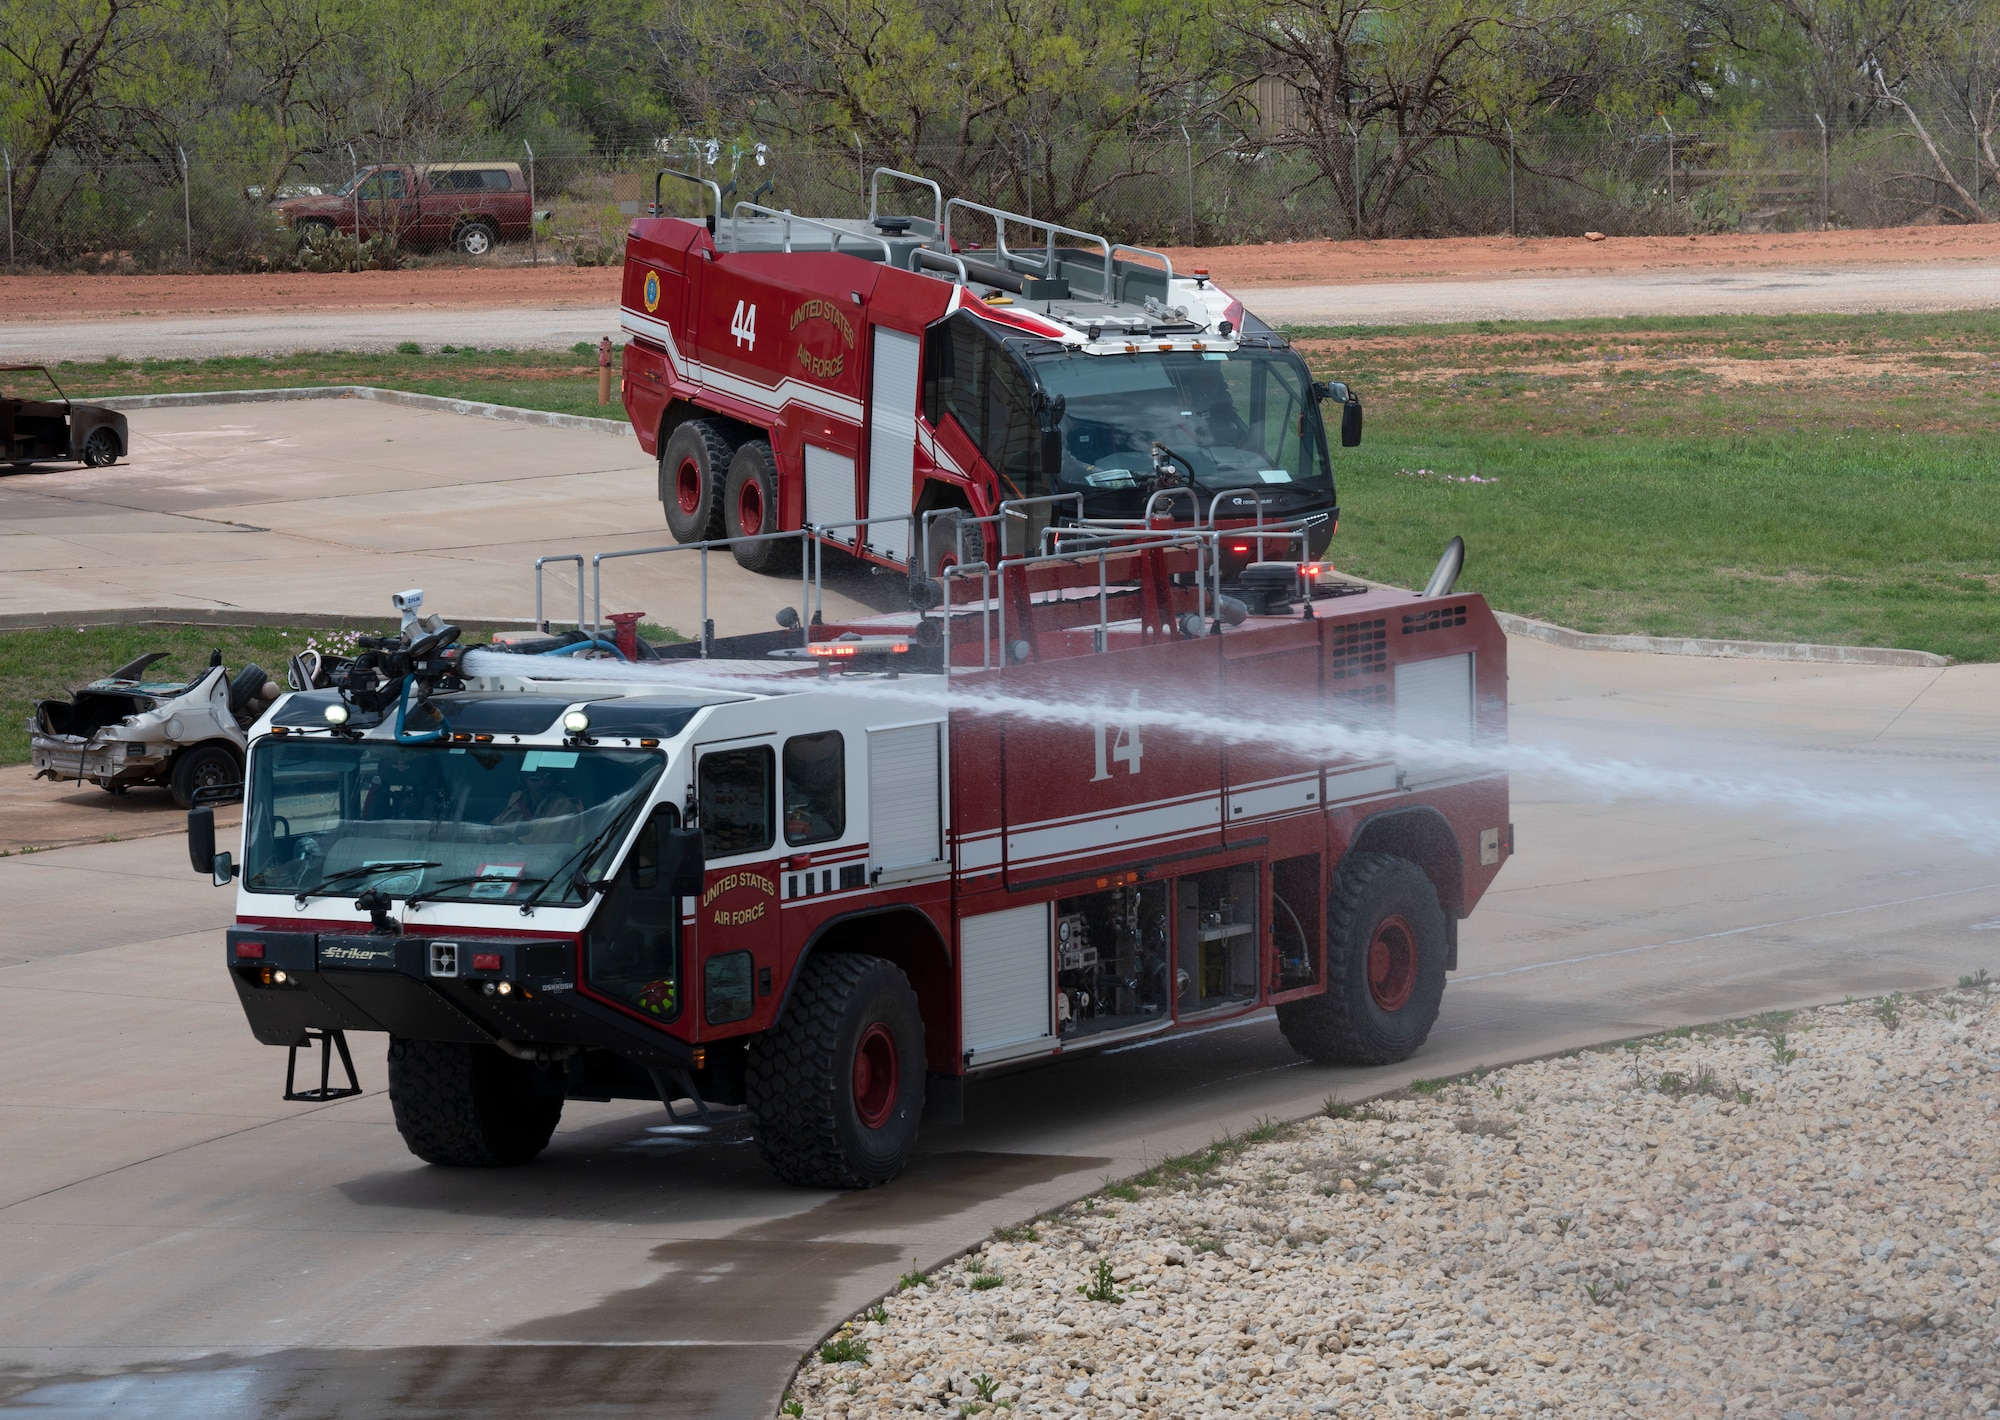 Firefighters from the 7th Civil Engineering Squadron extinguish a fire during a live fire training drill on Dyess Air Force Base, Texas, April 10, 2023. Firefighters from the 7th CES trained with Dallas Fort Worth and Abilene firefighters to educate them on effectively using Ultra High-Pressure systems to extinguish fires in minimal time. The training was held to not only educate civilian firefighters on Ultra High-Pressure systems but also to strengthen the partnership with local and state fire departments. (U.S. Air Force photo by Airman Emma Anderson)